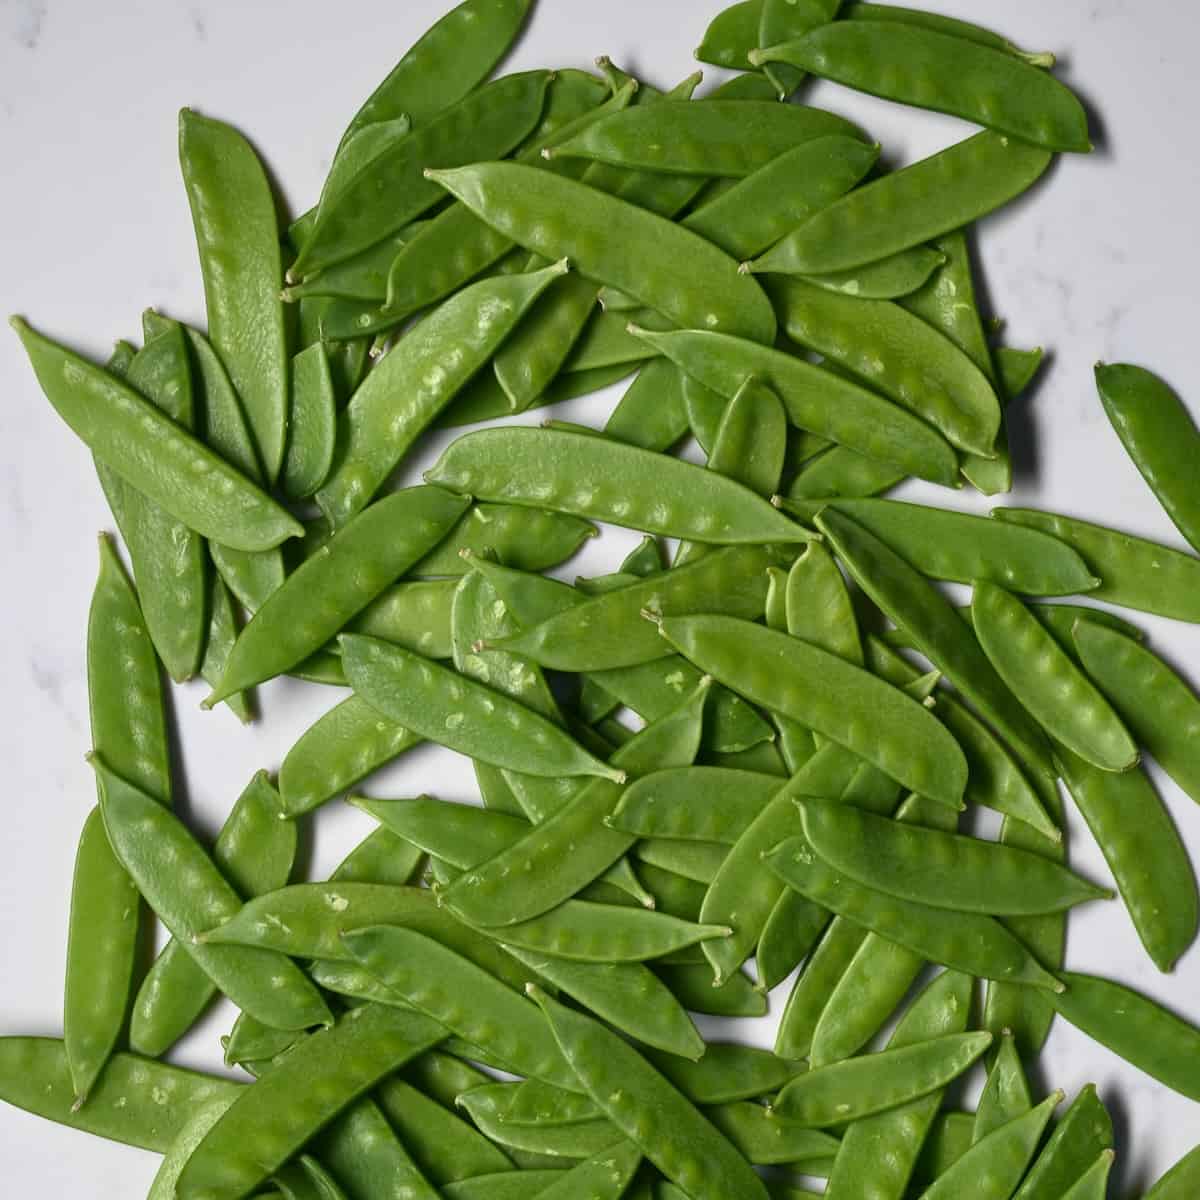 A bunch of snow peas